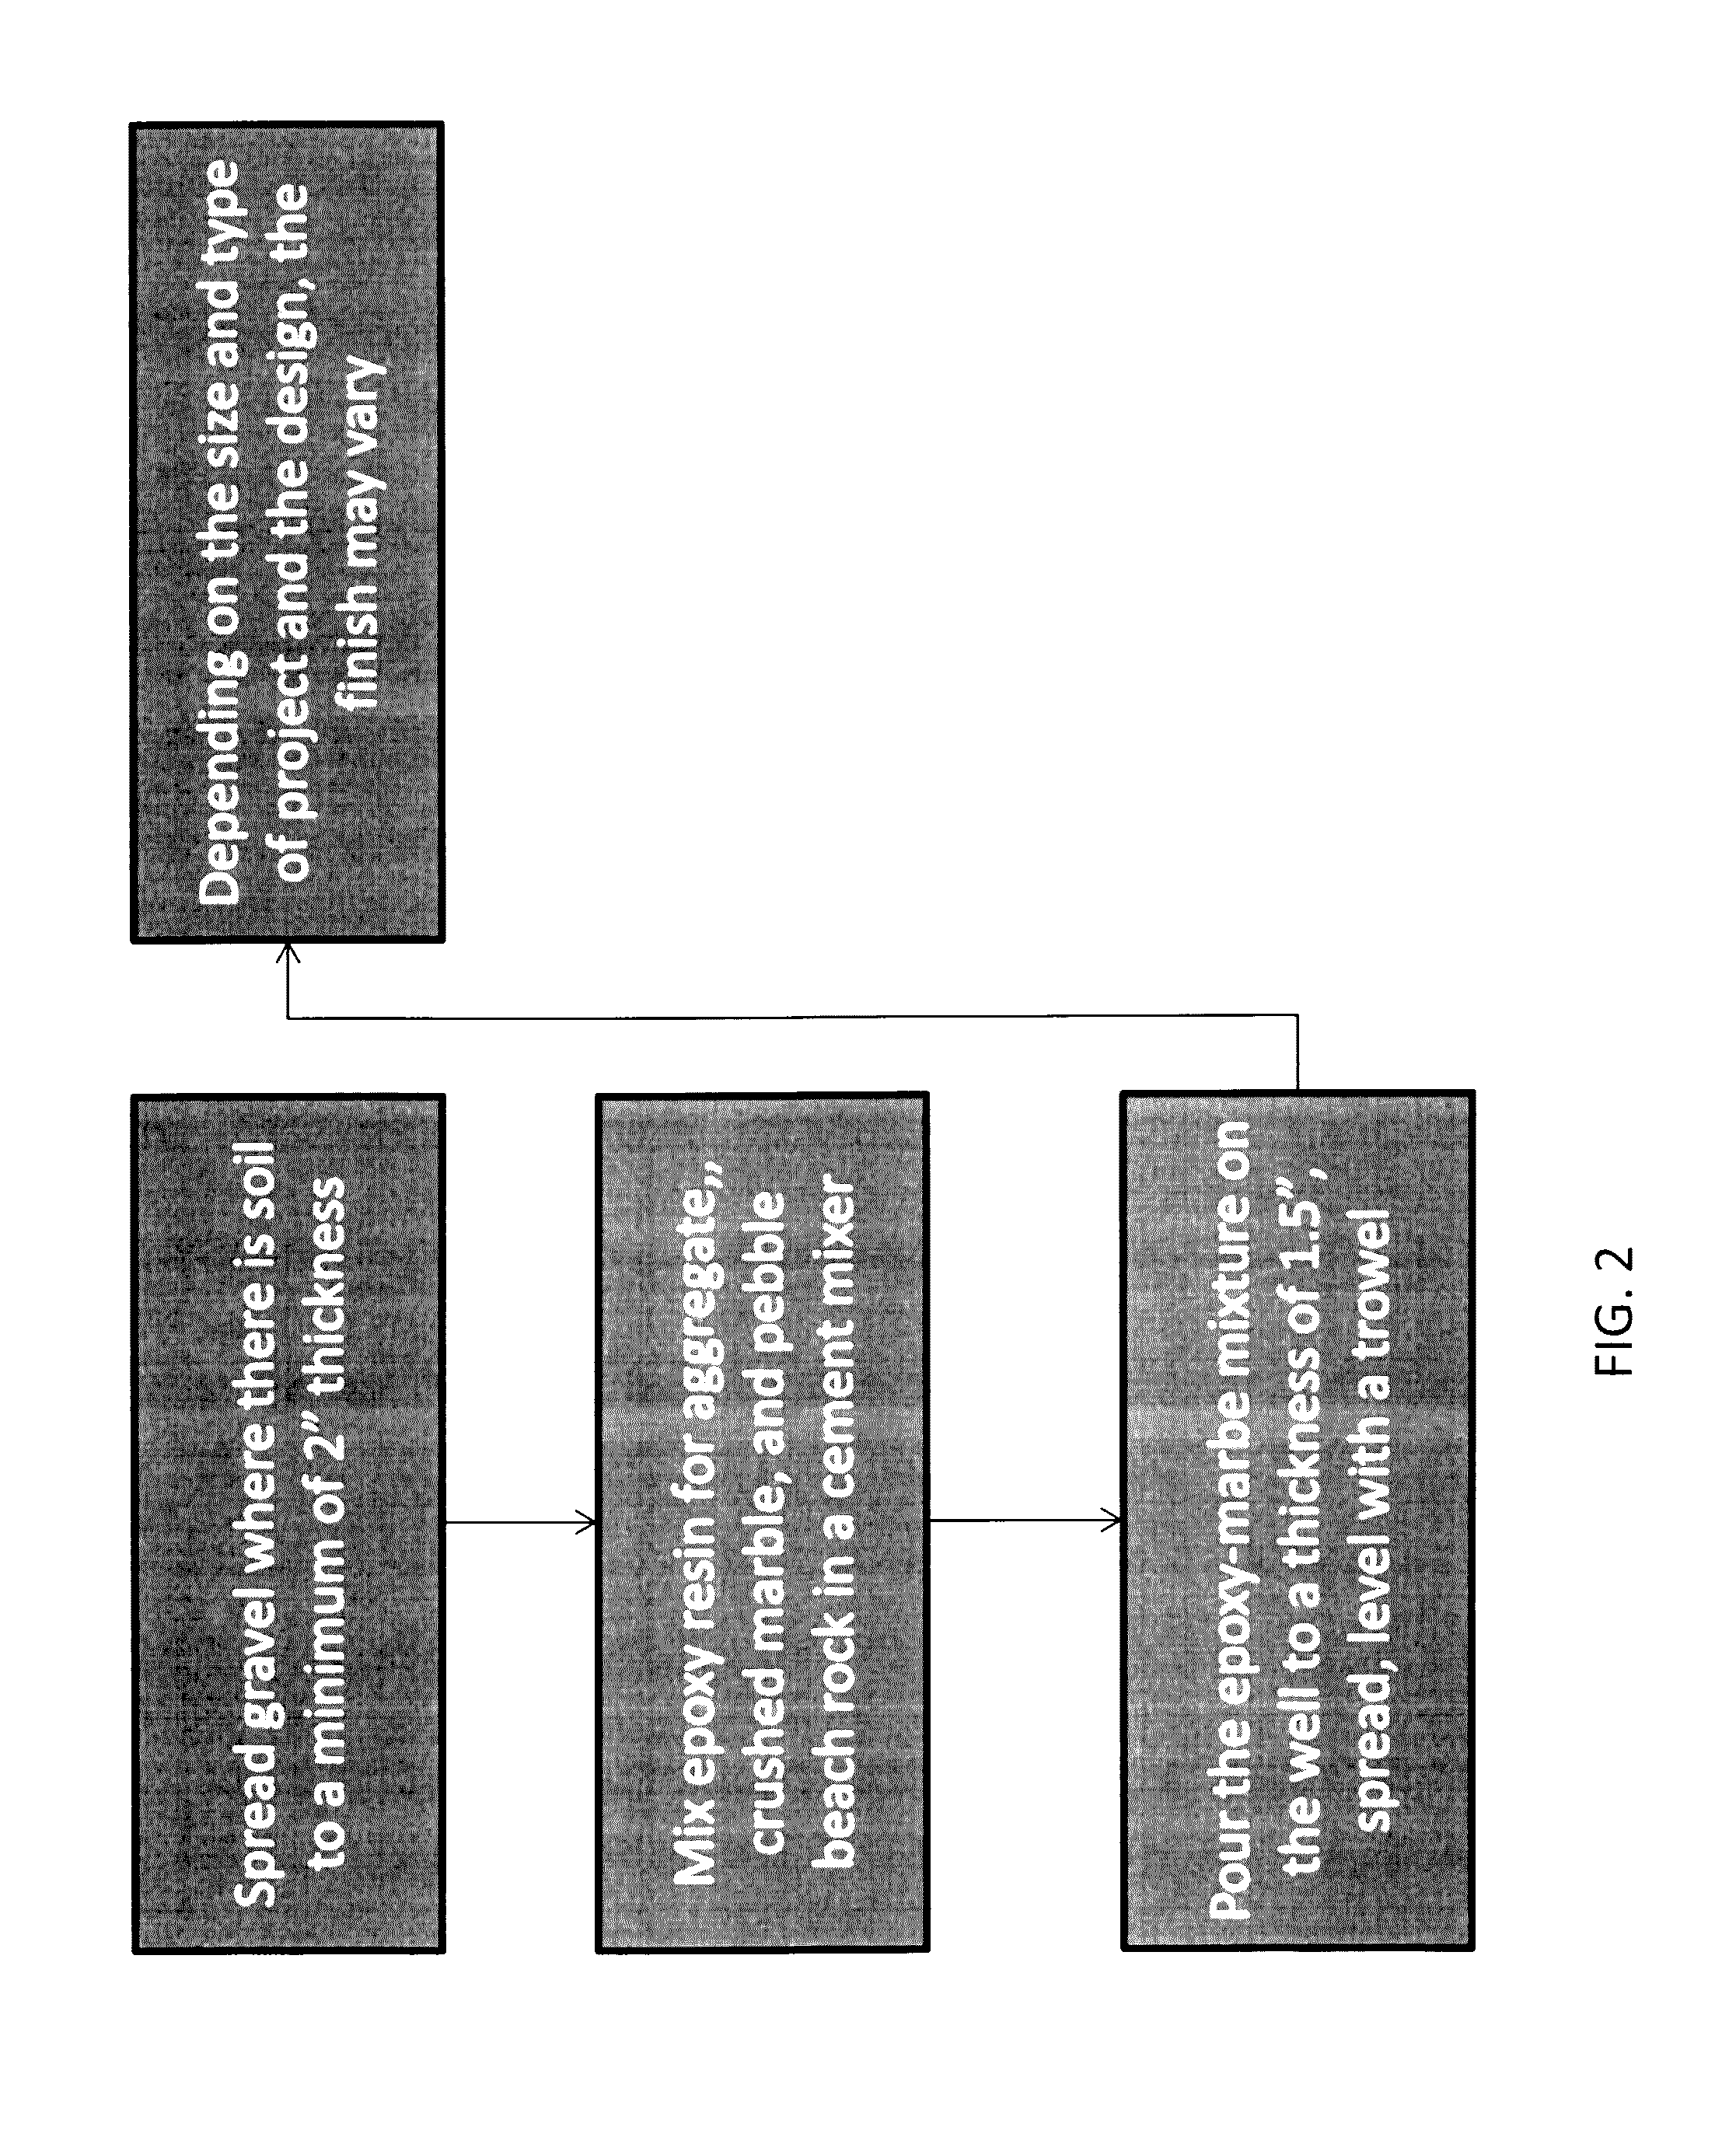 Tree well and related methods